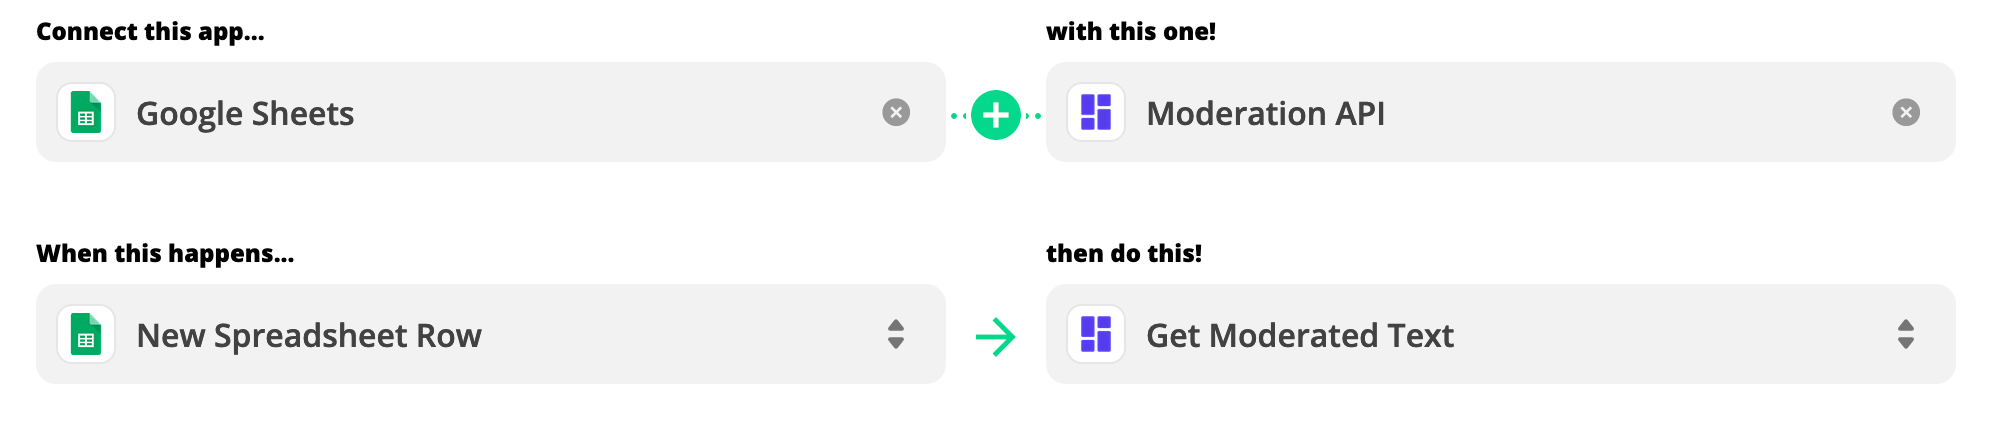 Zap connecting Google Sheets with Moderation API